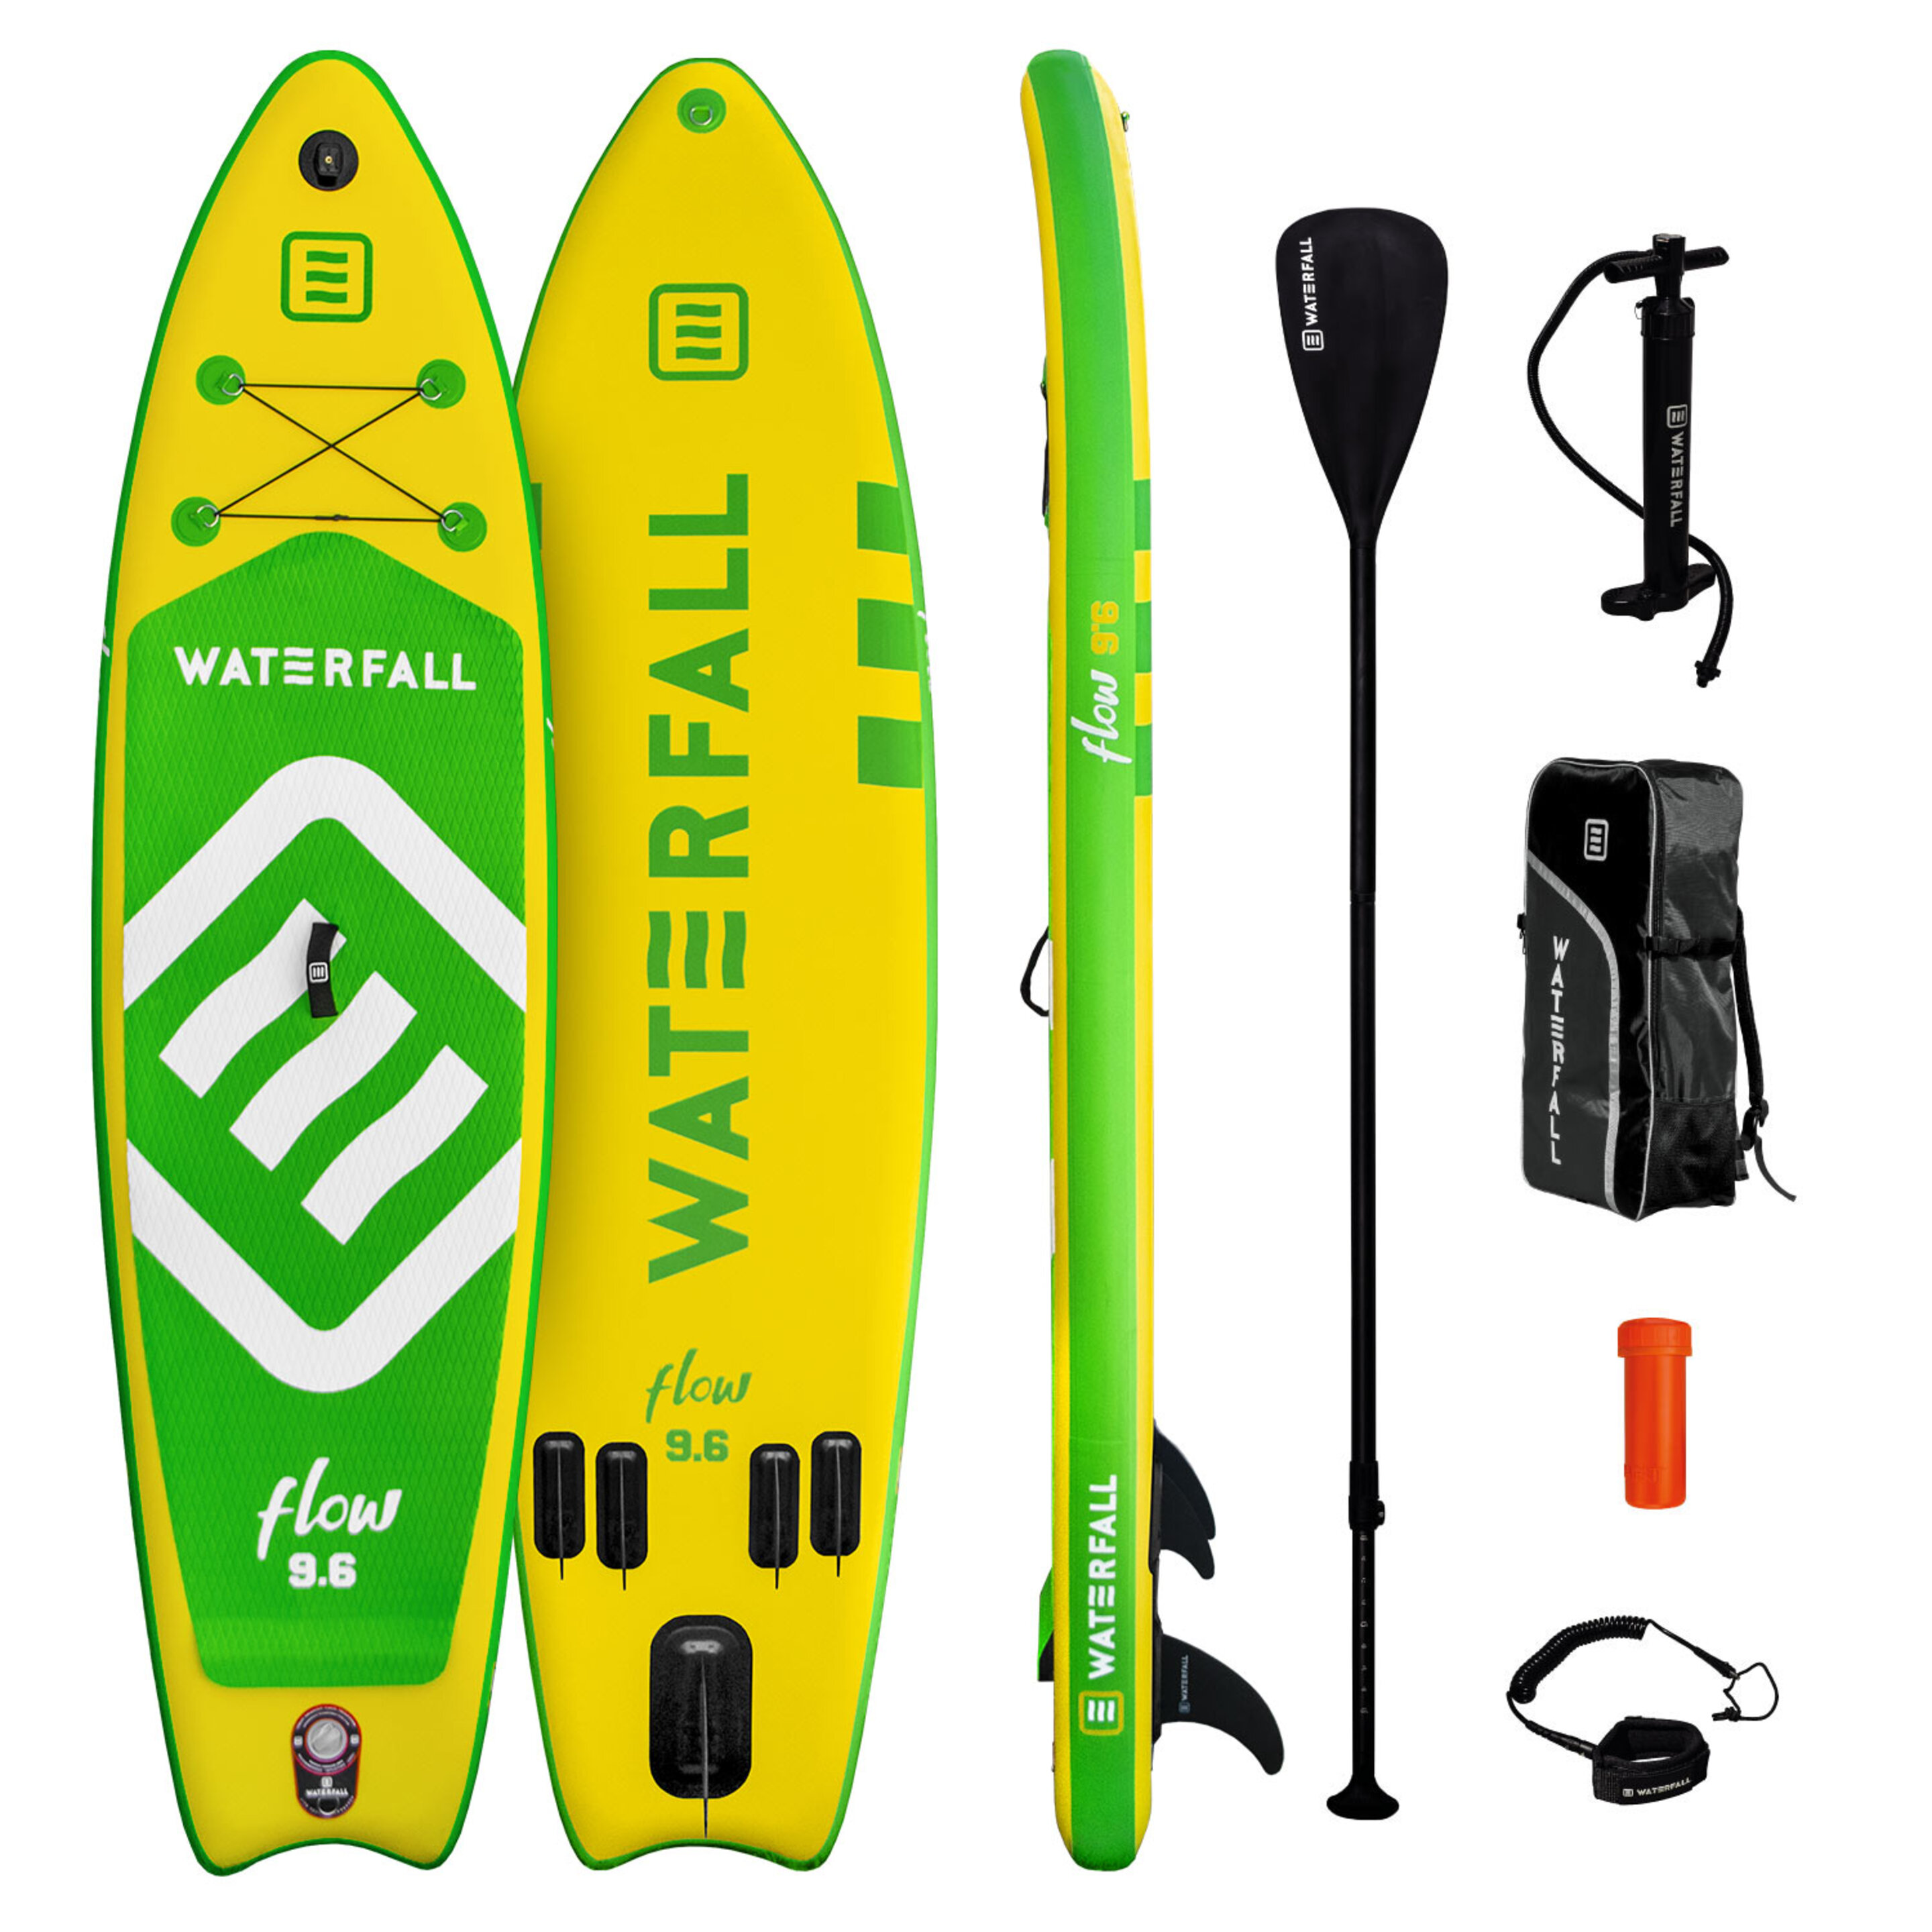 Tabla De Stand Up Paddle Inflable Waterfall Flow 9.6 Surf